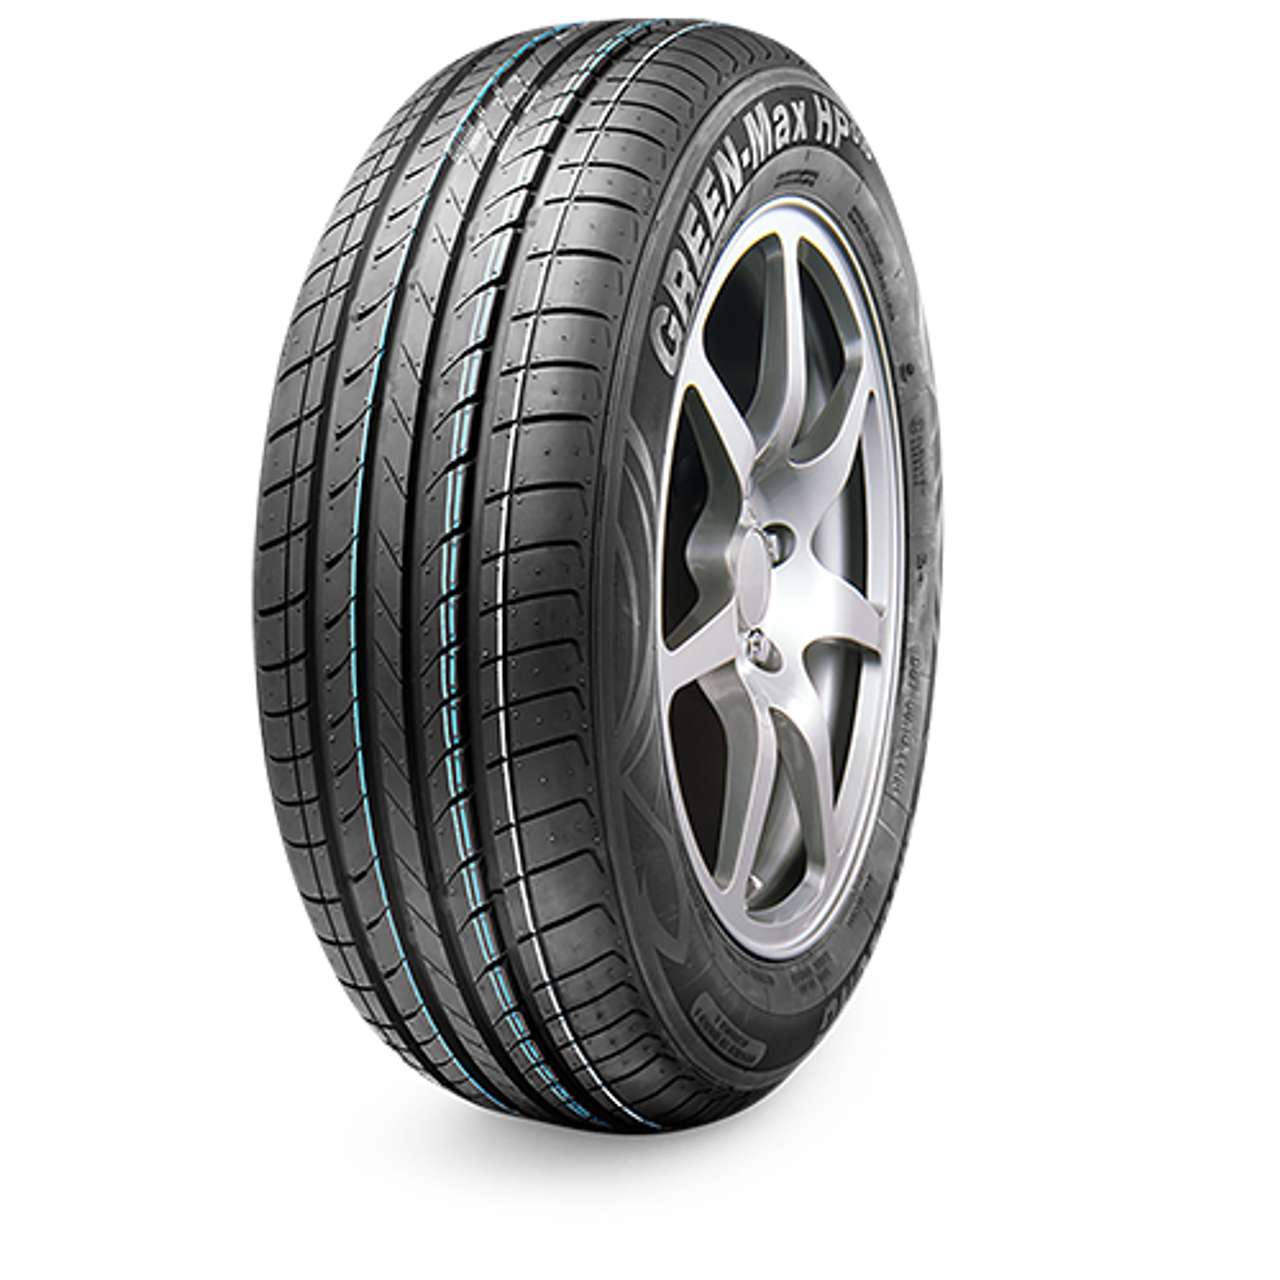 LINGLONG GREEN-MAX HP010 185/50R16 81H MFS BSW von LINGLONG